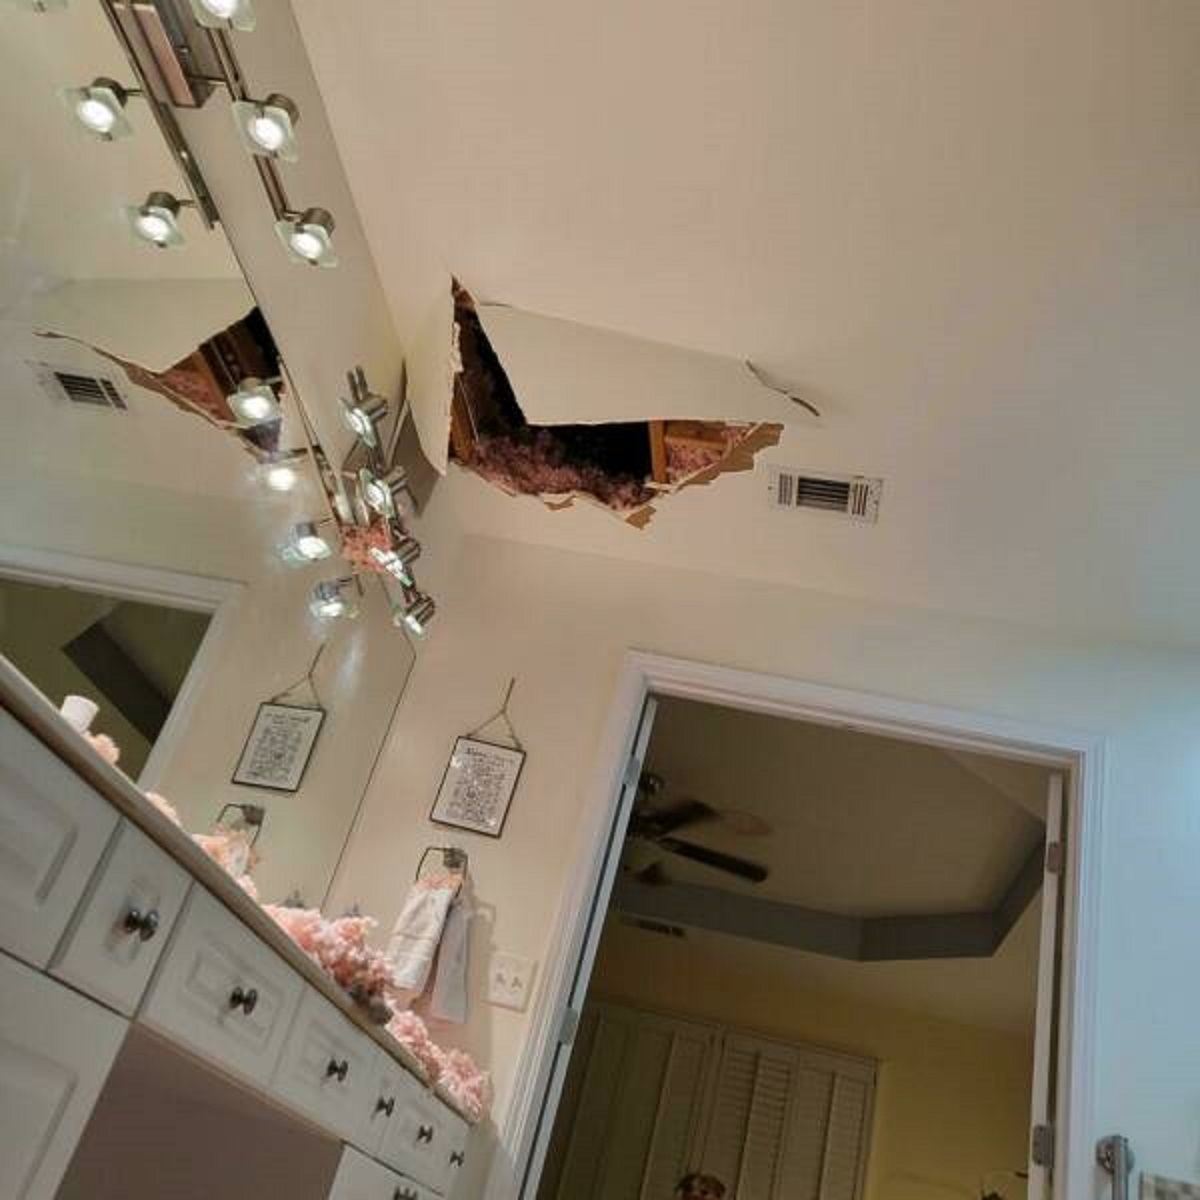 "This Is My View From The Bathroom Floor, Looking At The Hole In The Ceiling I Just Fell Through"